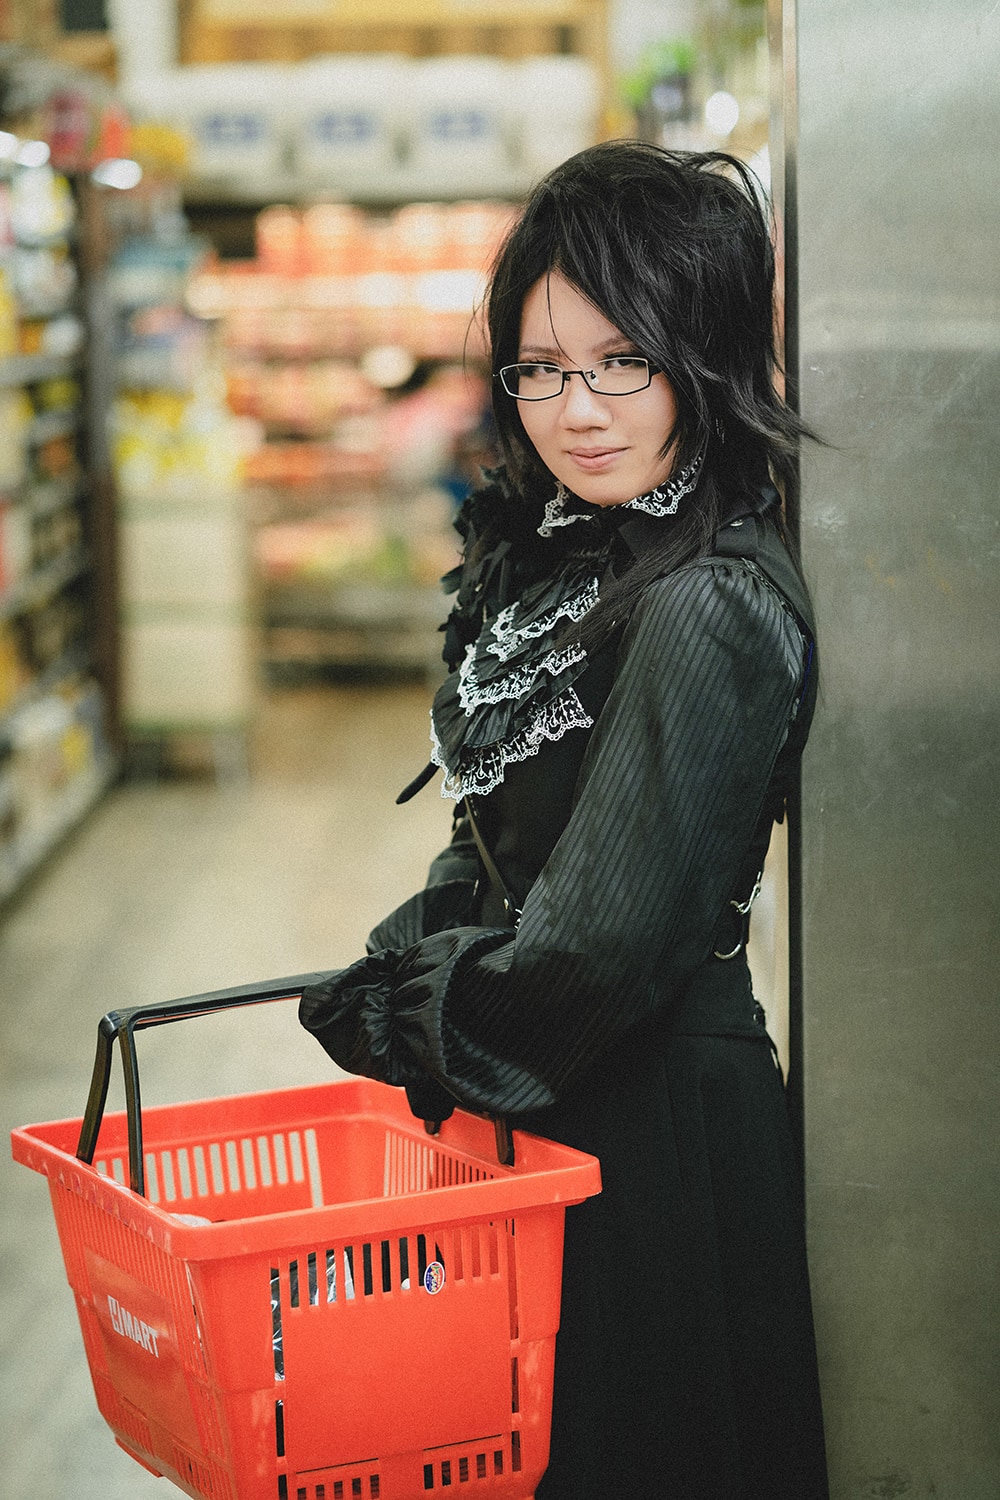 holding a shopping basket in grocery store.